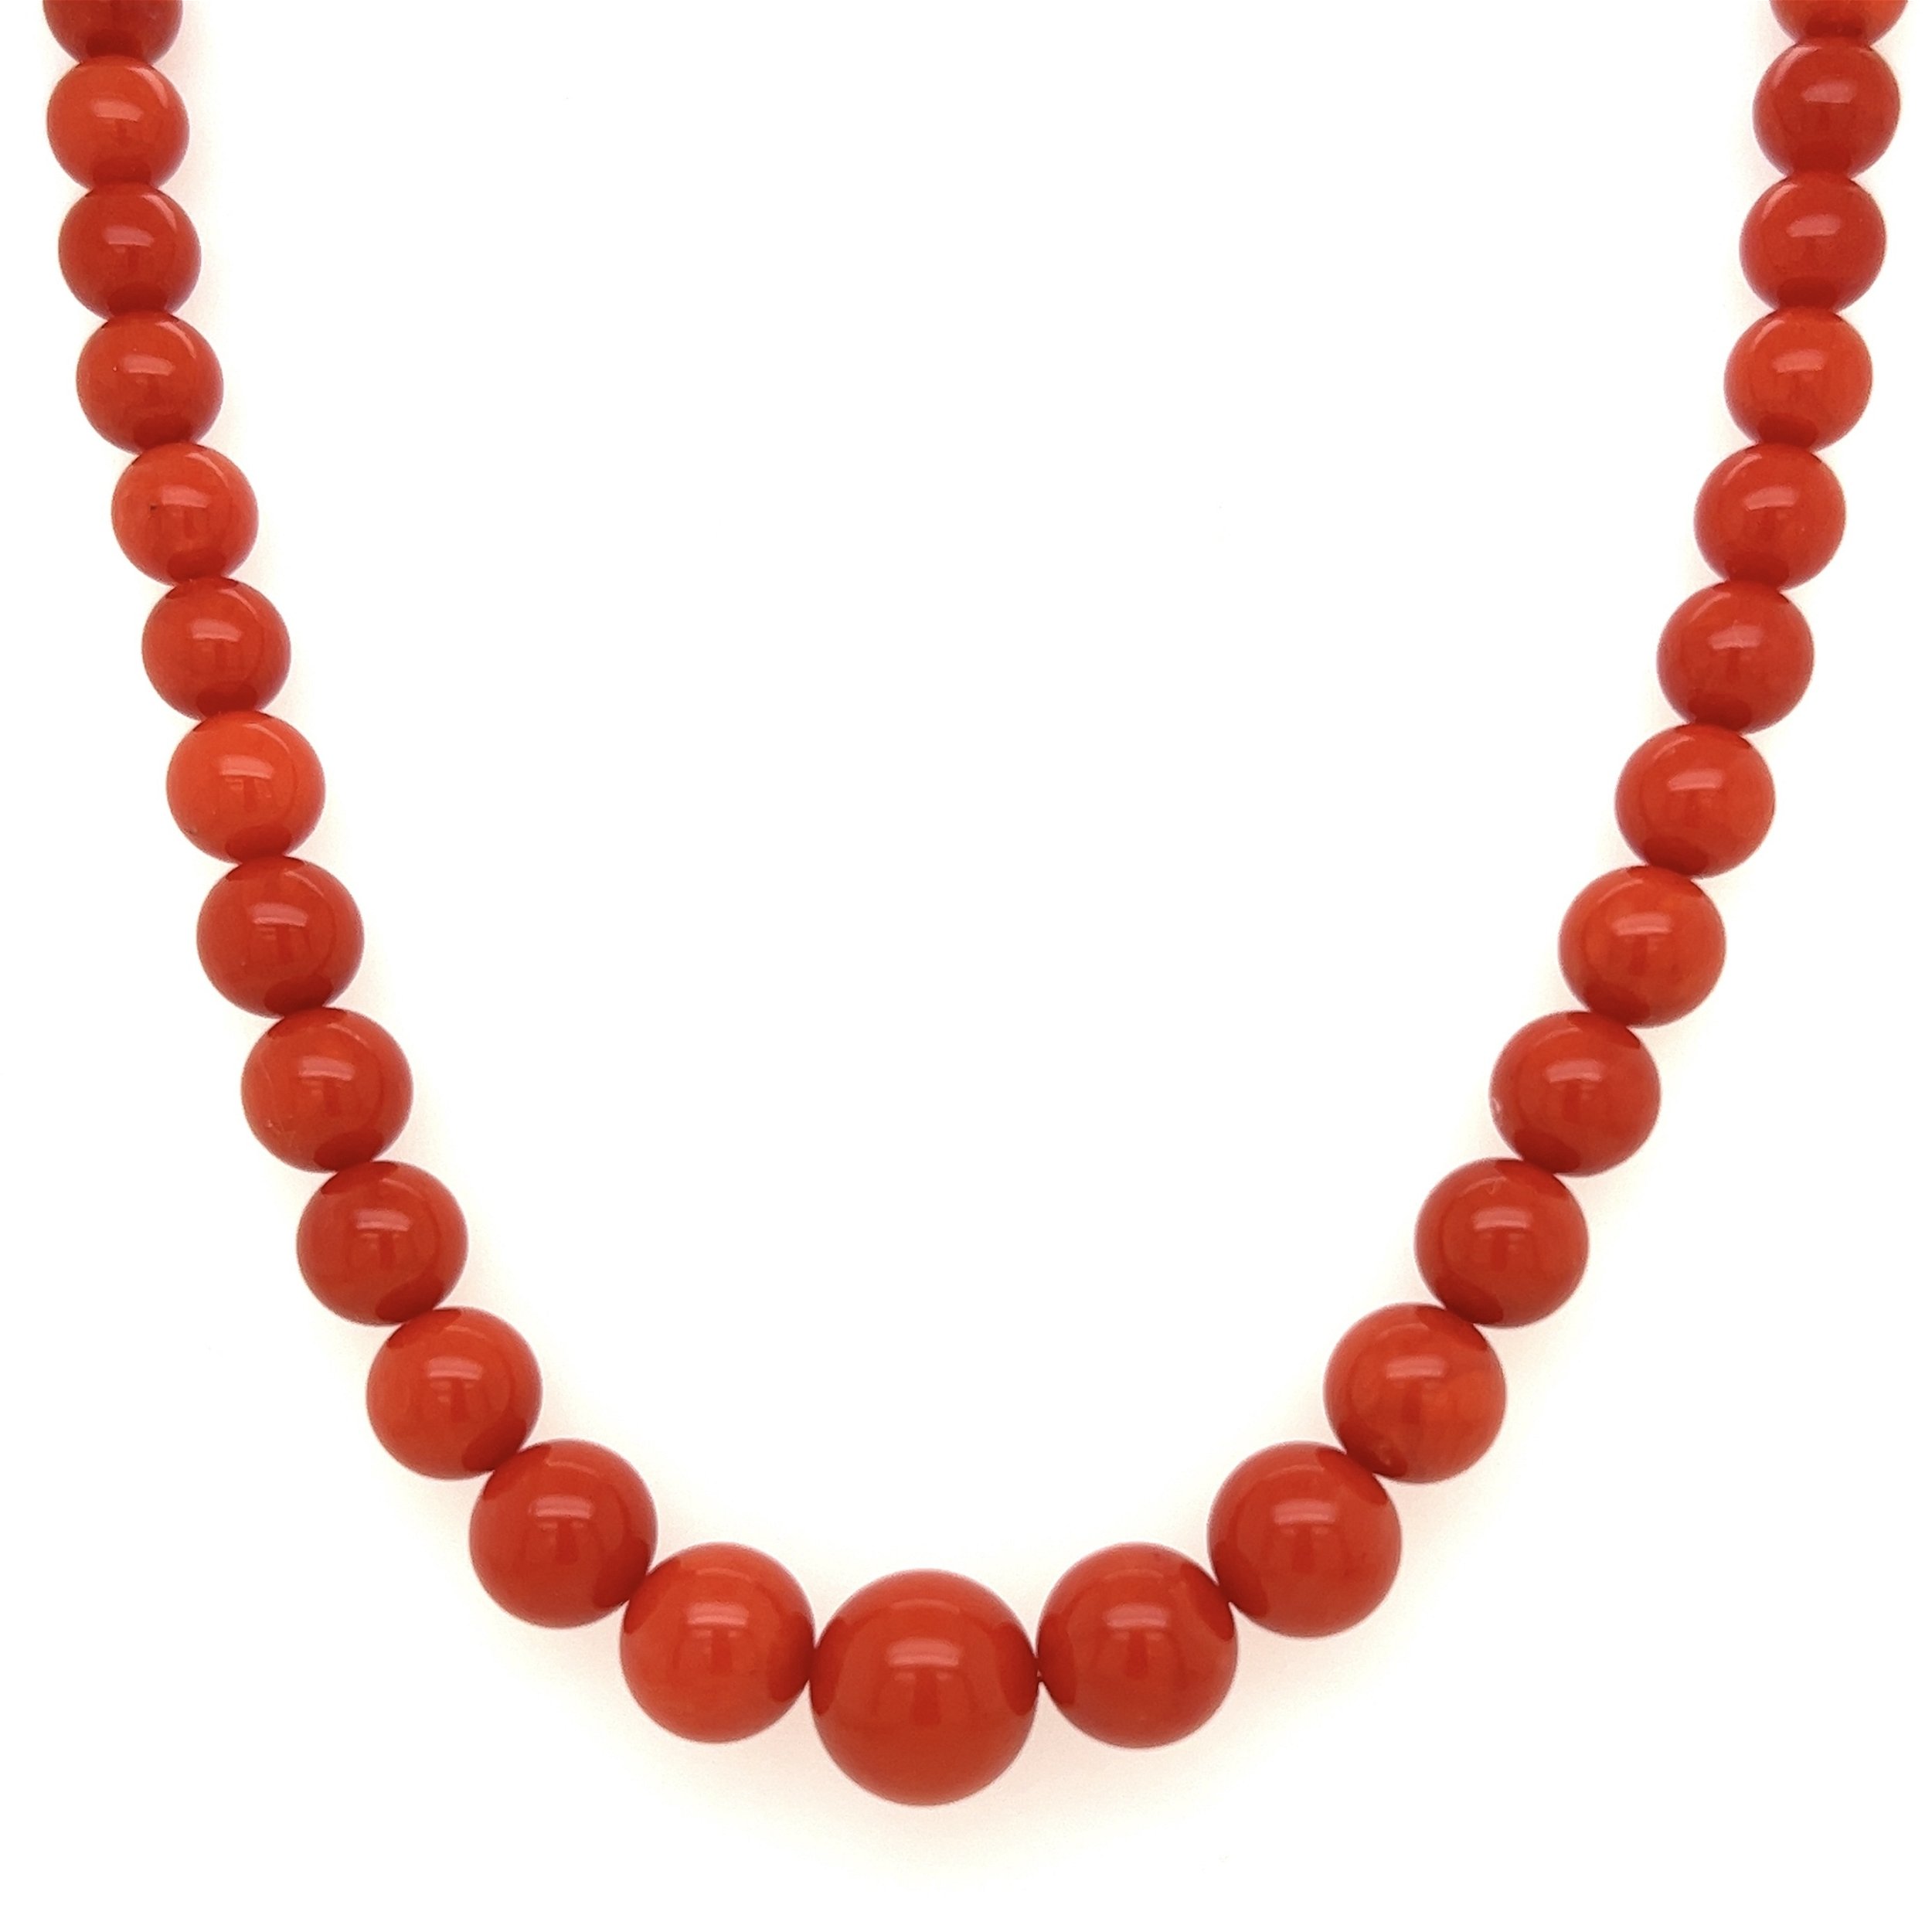 14K YG 10.3-5.00mm Natural Red Coral Graduated Bead Necklace 33.1g, 18"